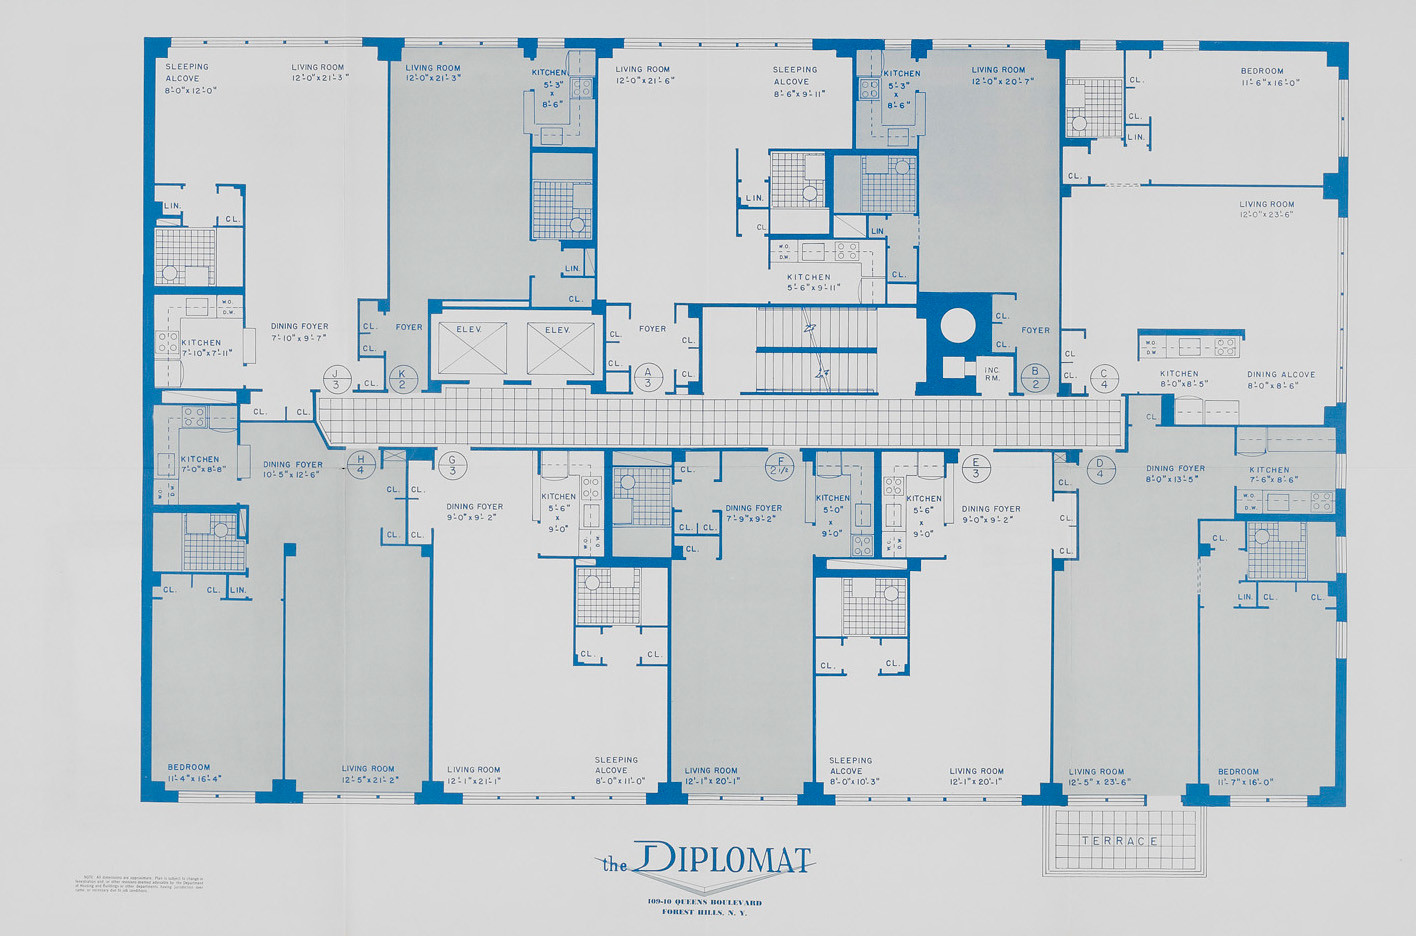 Blueprint of the building